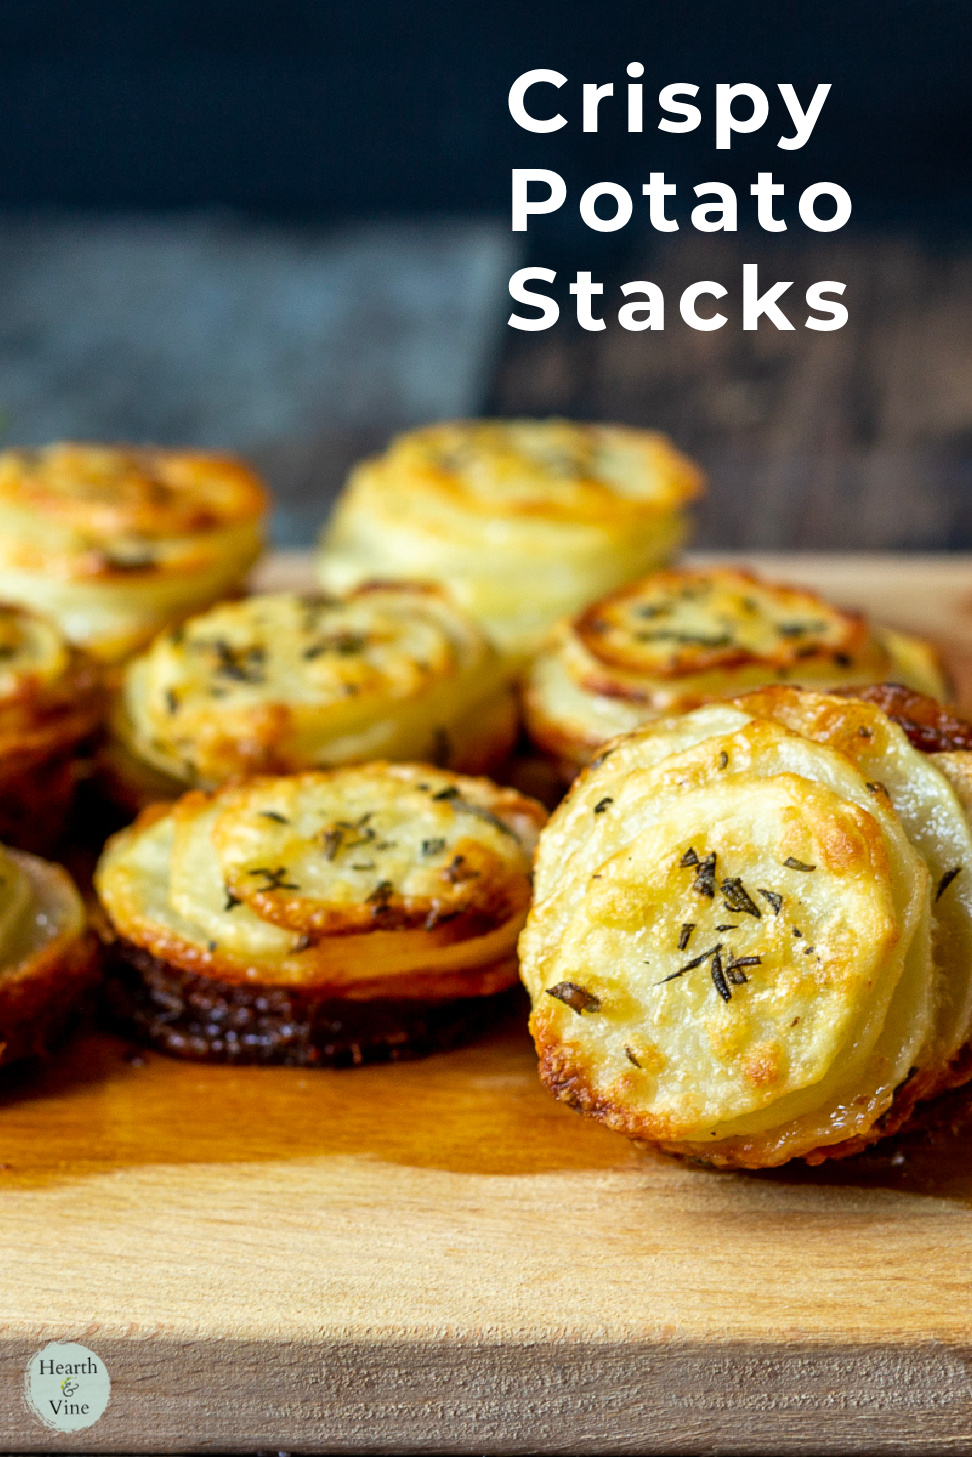 Crispy potato stacks with Parmesan and chopped rosemary leaves on a board.